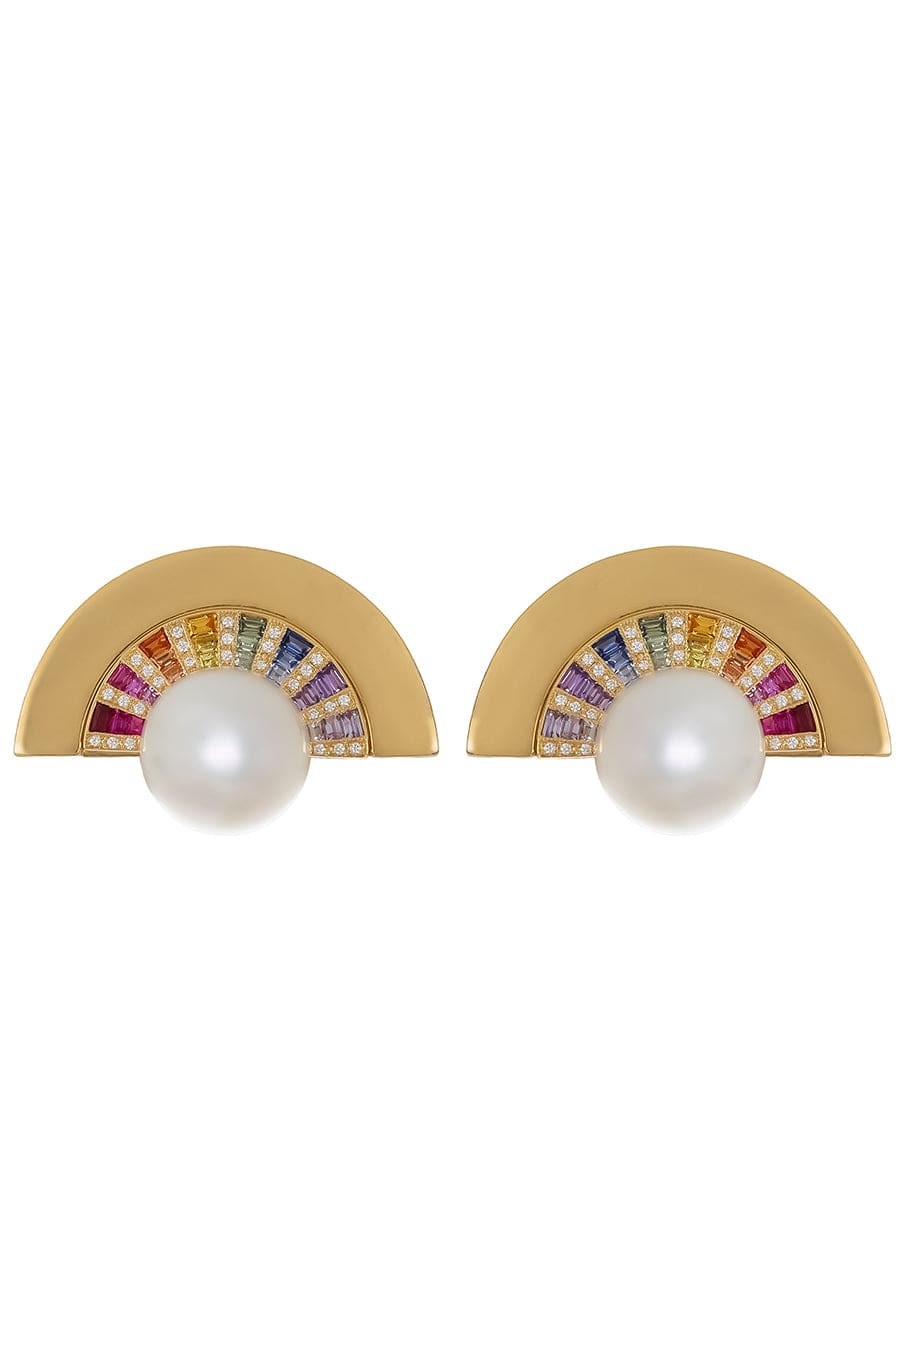 KAVANT & SHARART-Pearl and Sapphire Twist Reflection Double Jacket Earrings-YELLOW GOLD